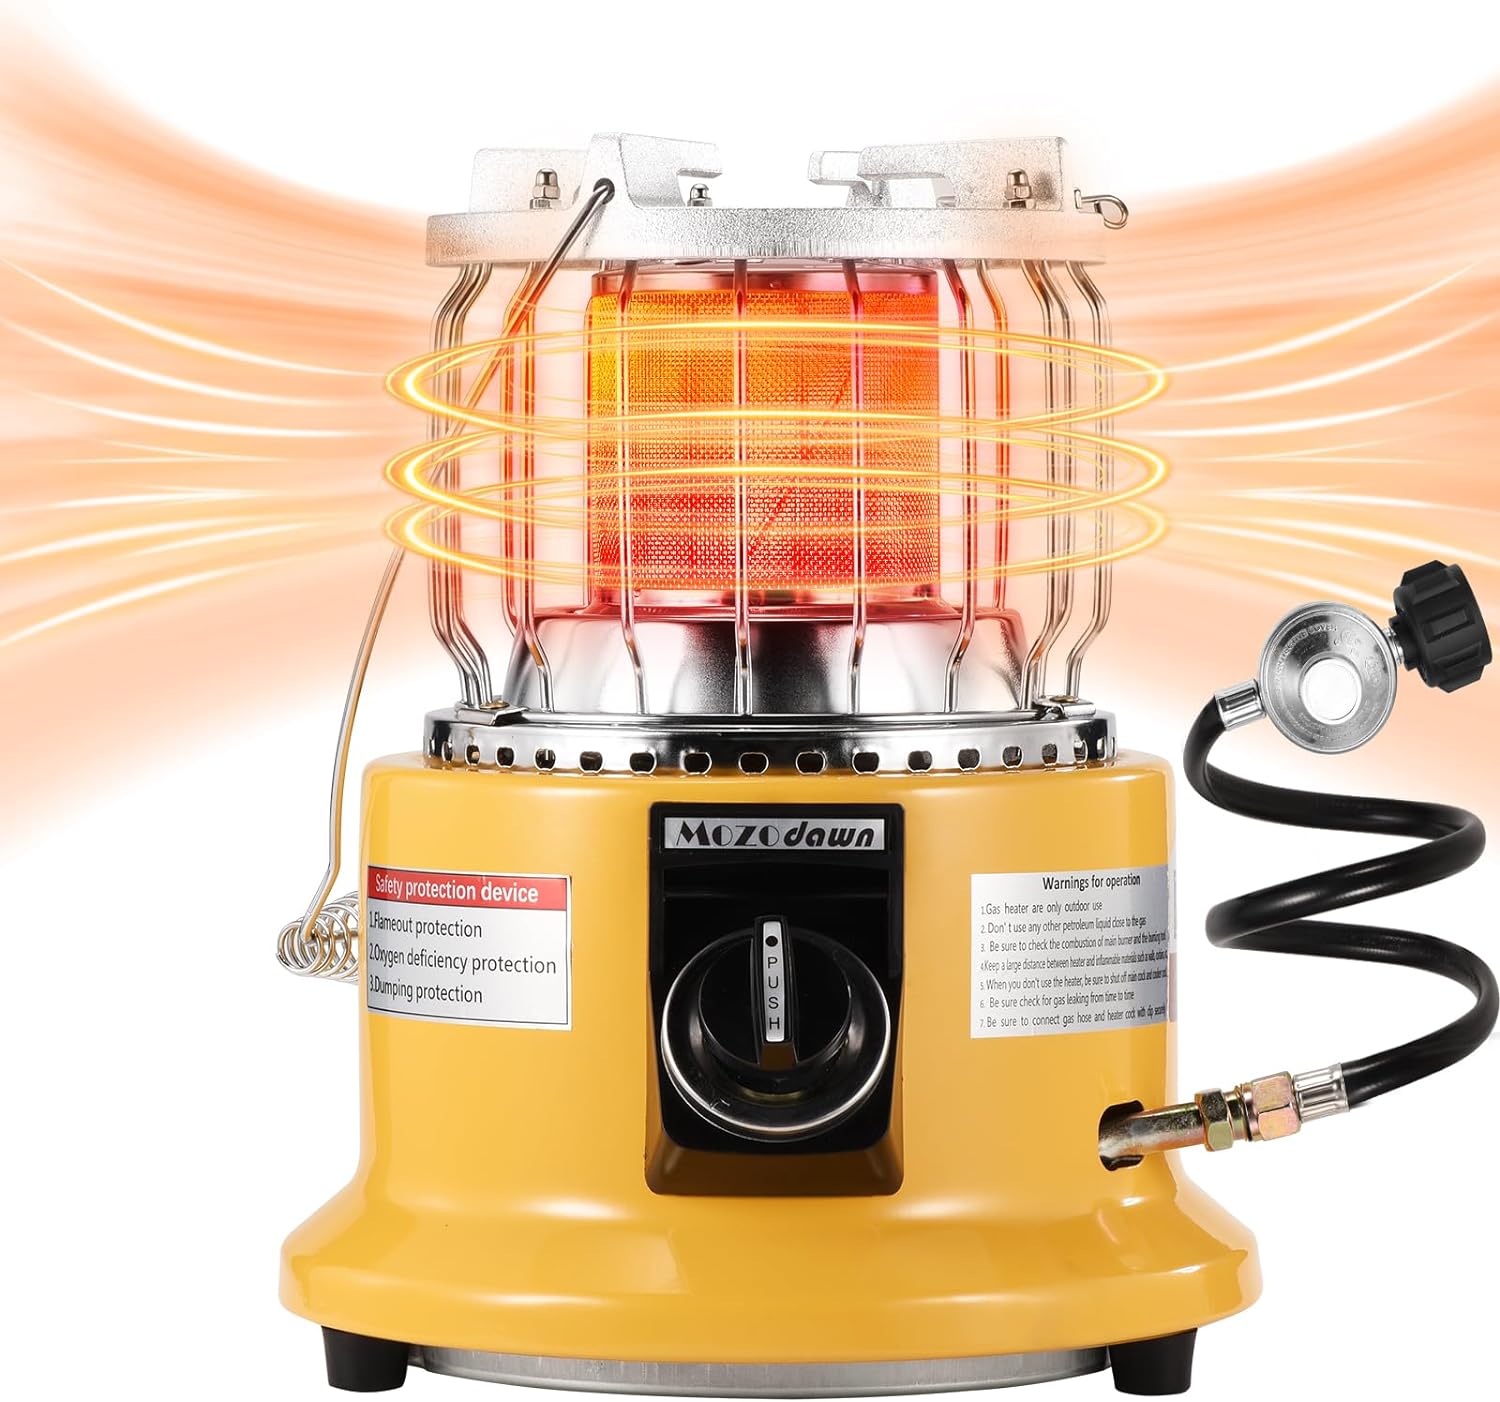 MOZODAWN 2 In 1 Propane Heater & Stove Review